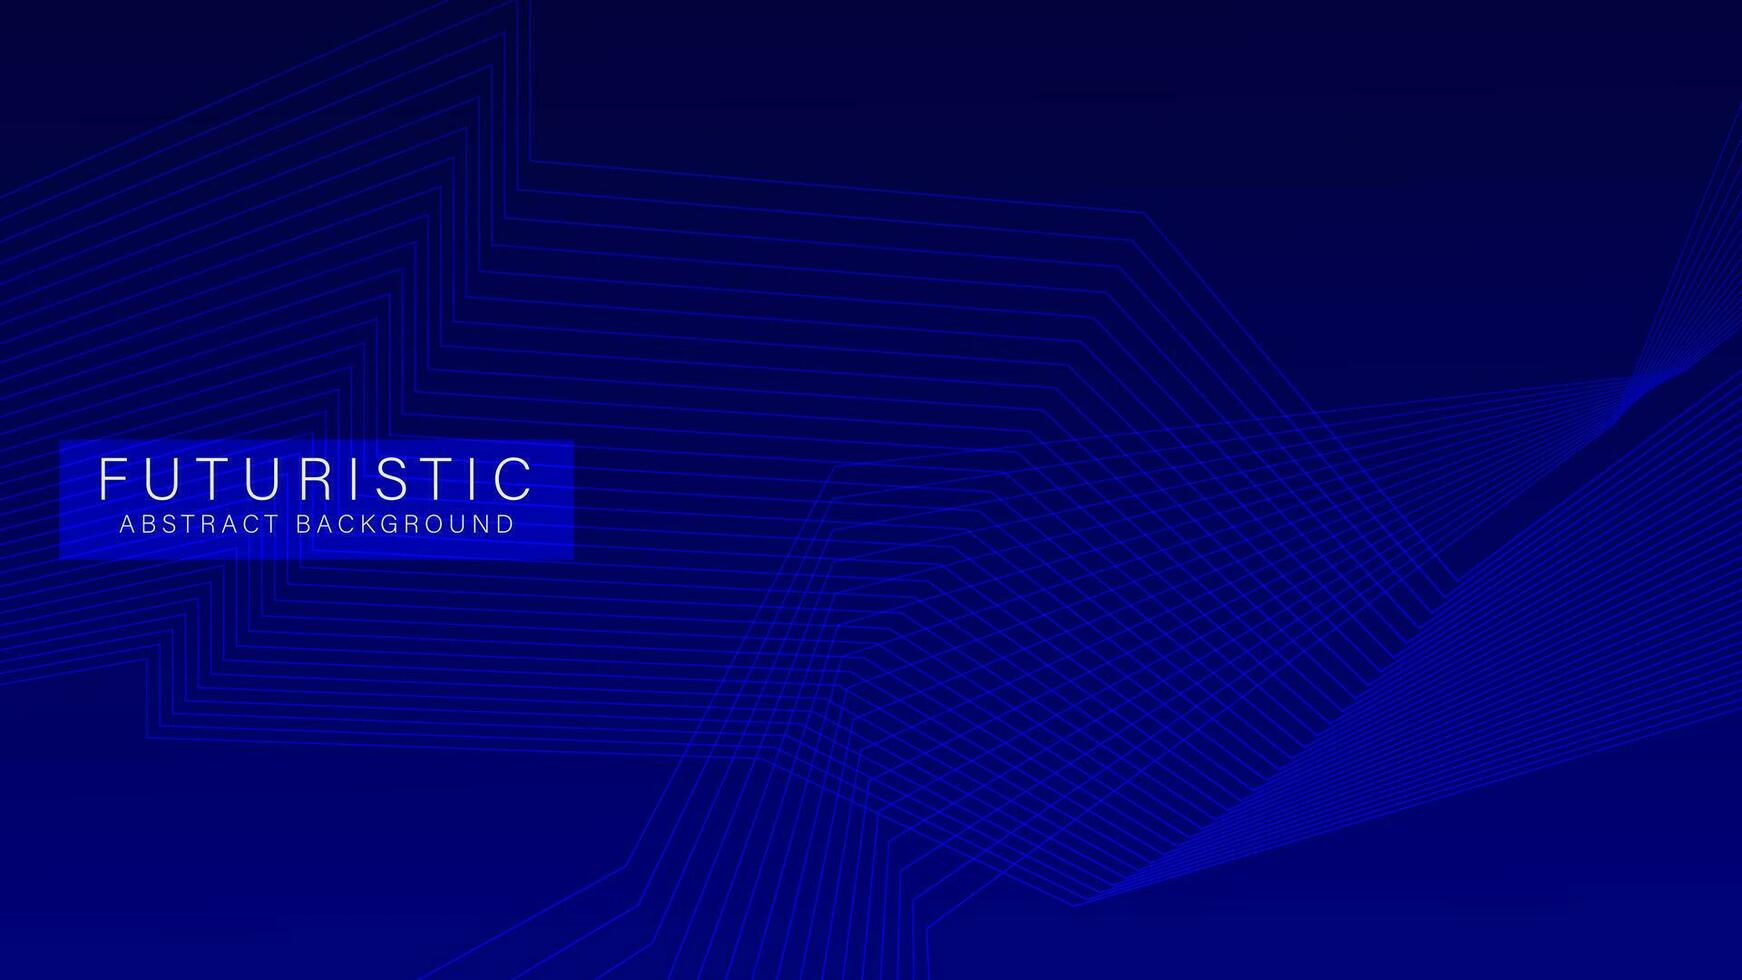 Futuristic abstract background, With Dark blue wavy lines pattern, horizontal banner template. Vector illustration design